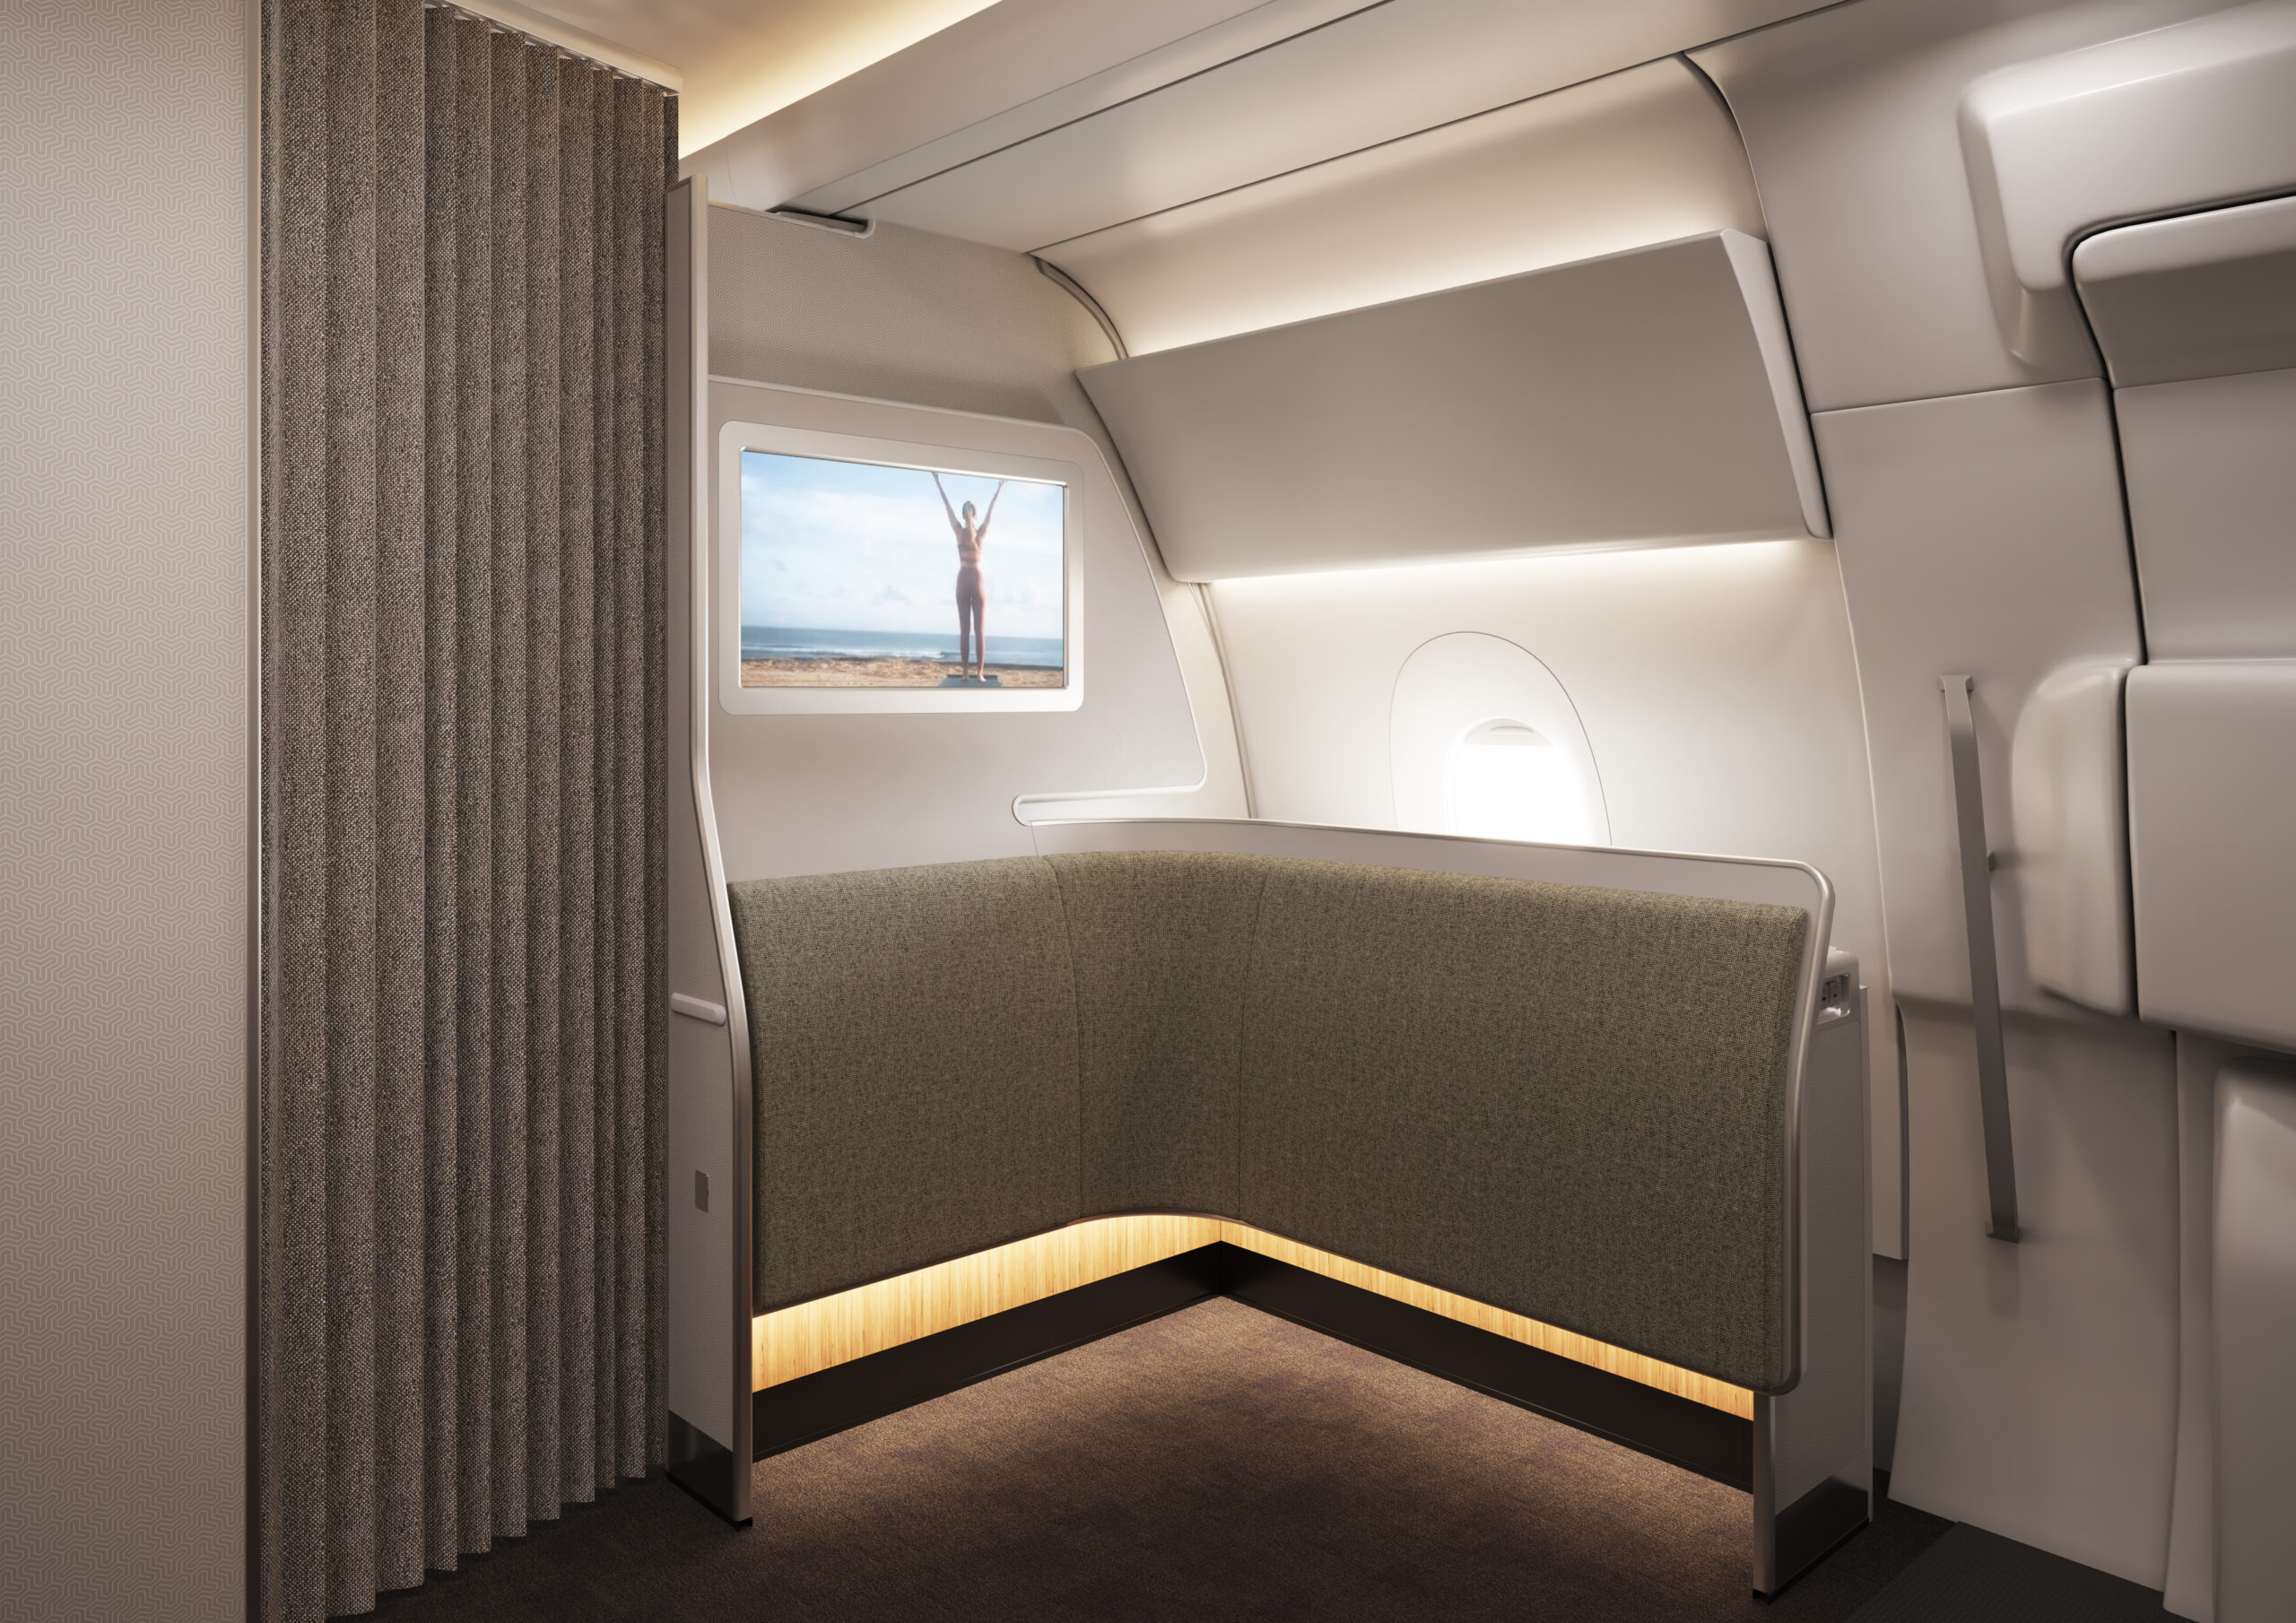 Photos: Qantas Unveils Wellbeing Zone on Project Sunrise A350-1000